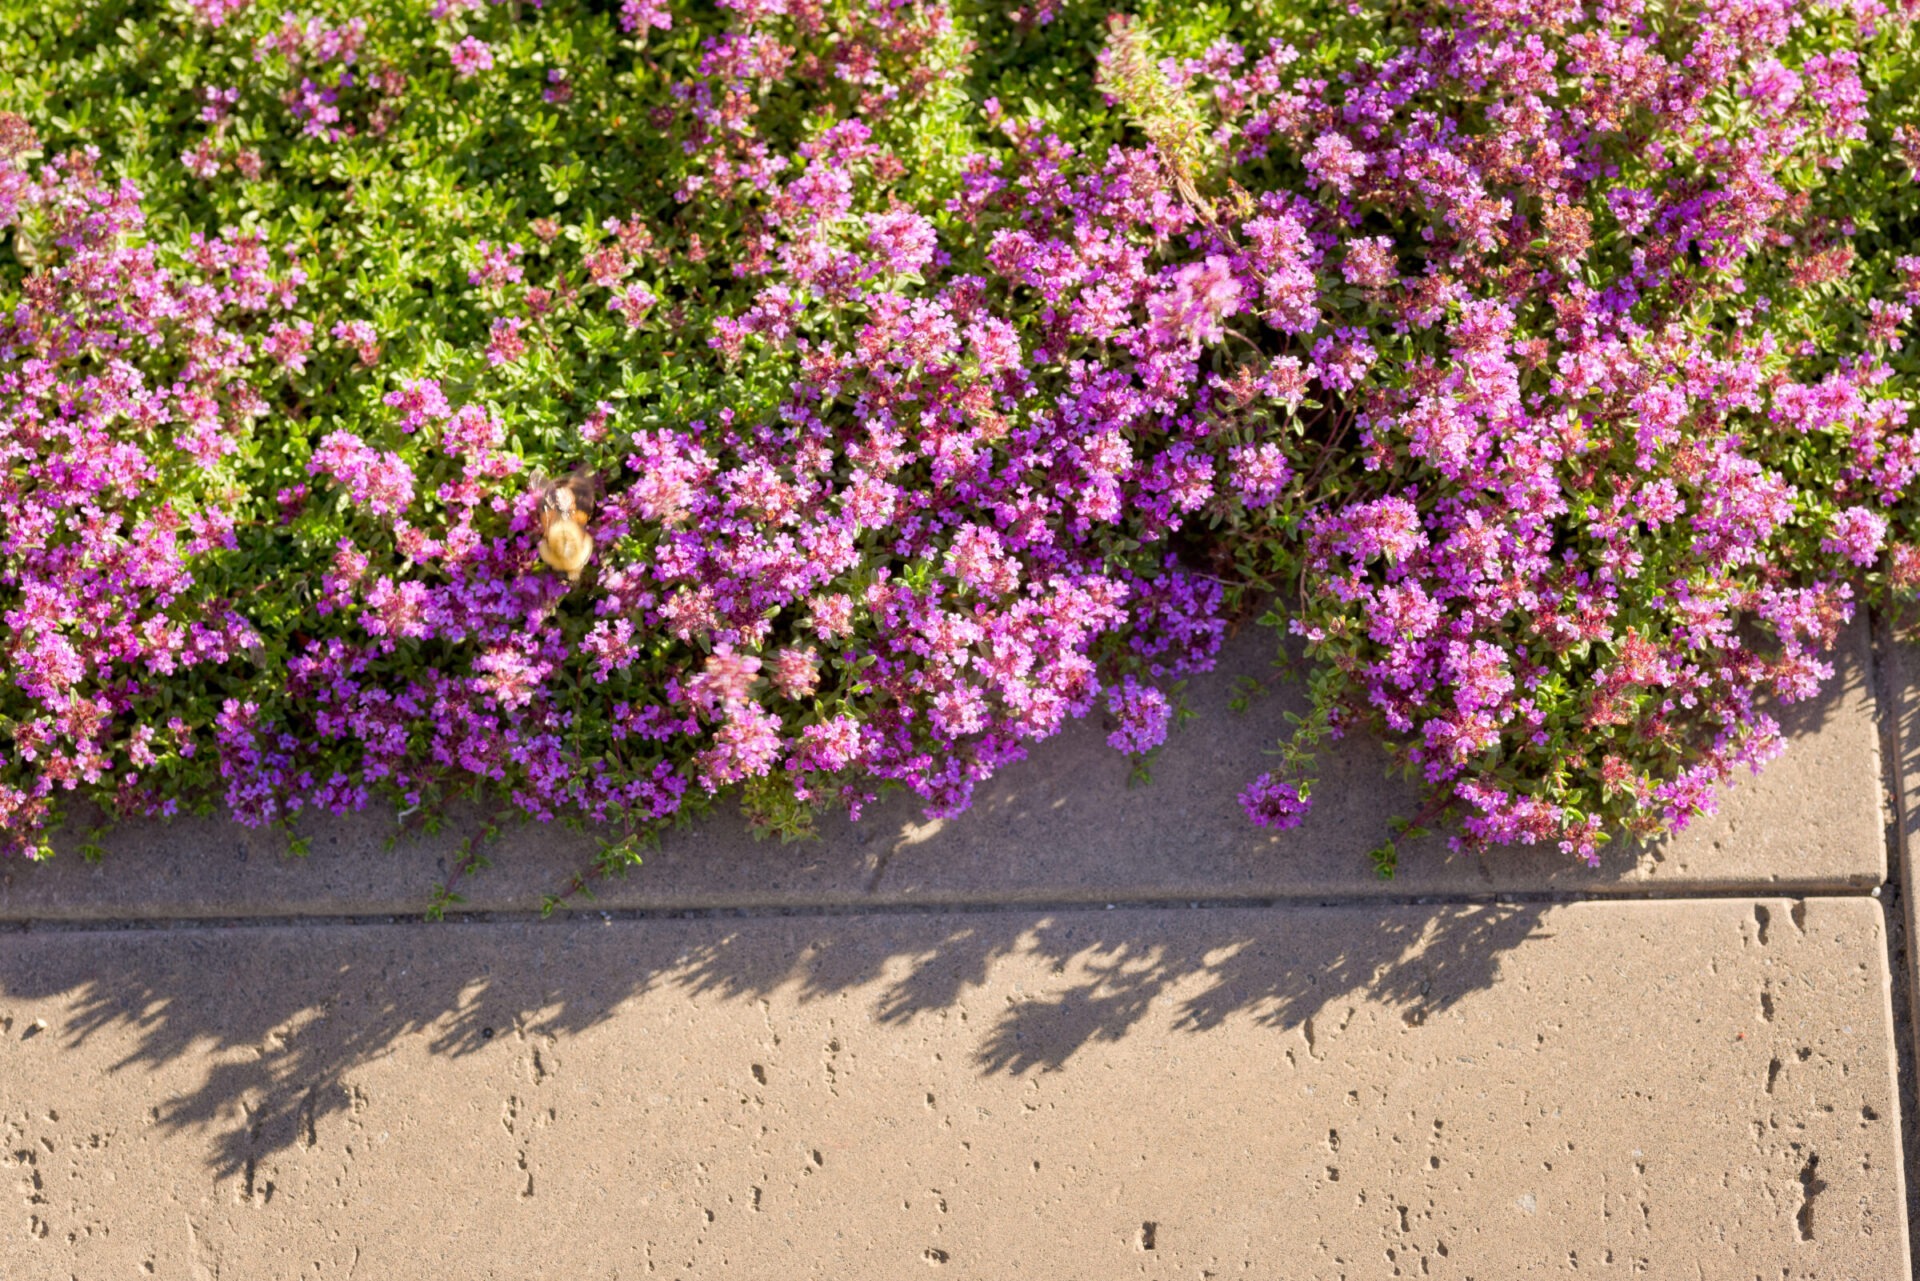 This image shows a bunch of vibrant purple flowers overhanging a concrete edge, casting shadows in the sunlight on the textured ground beneath.